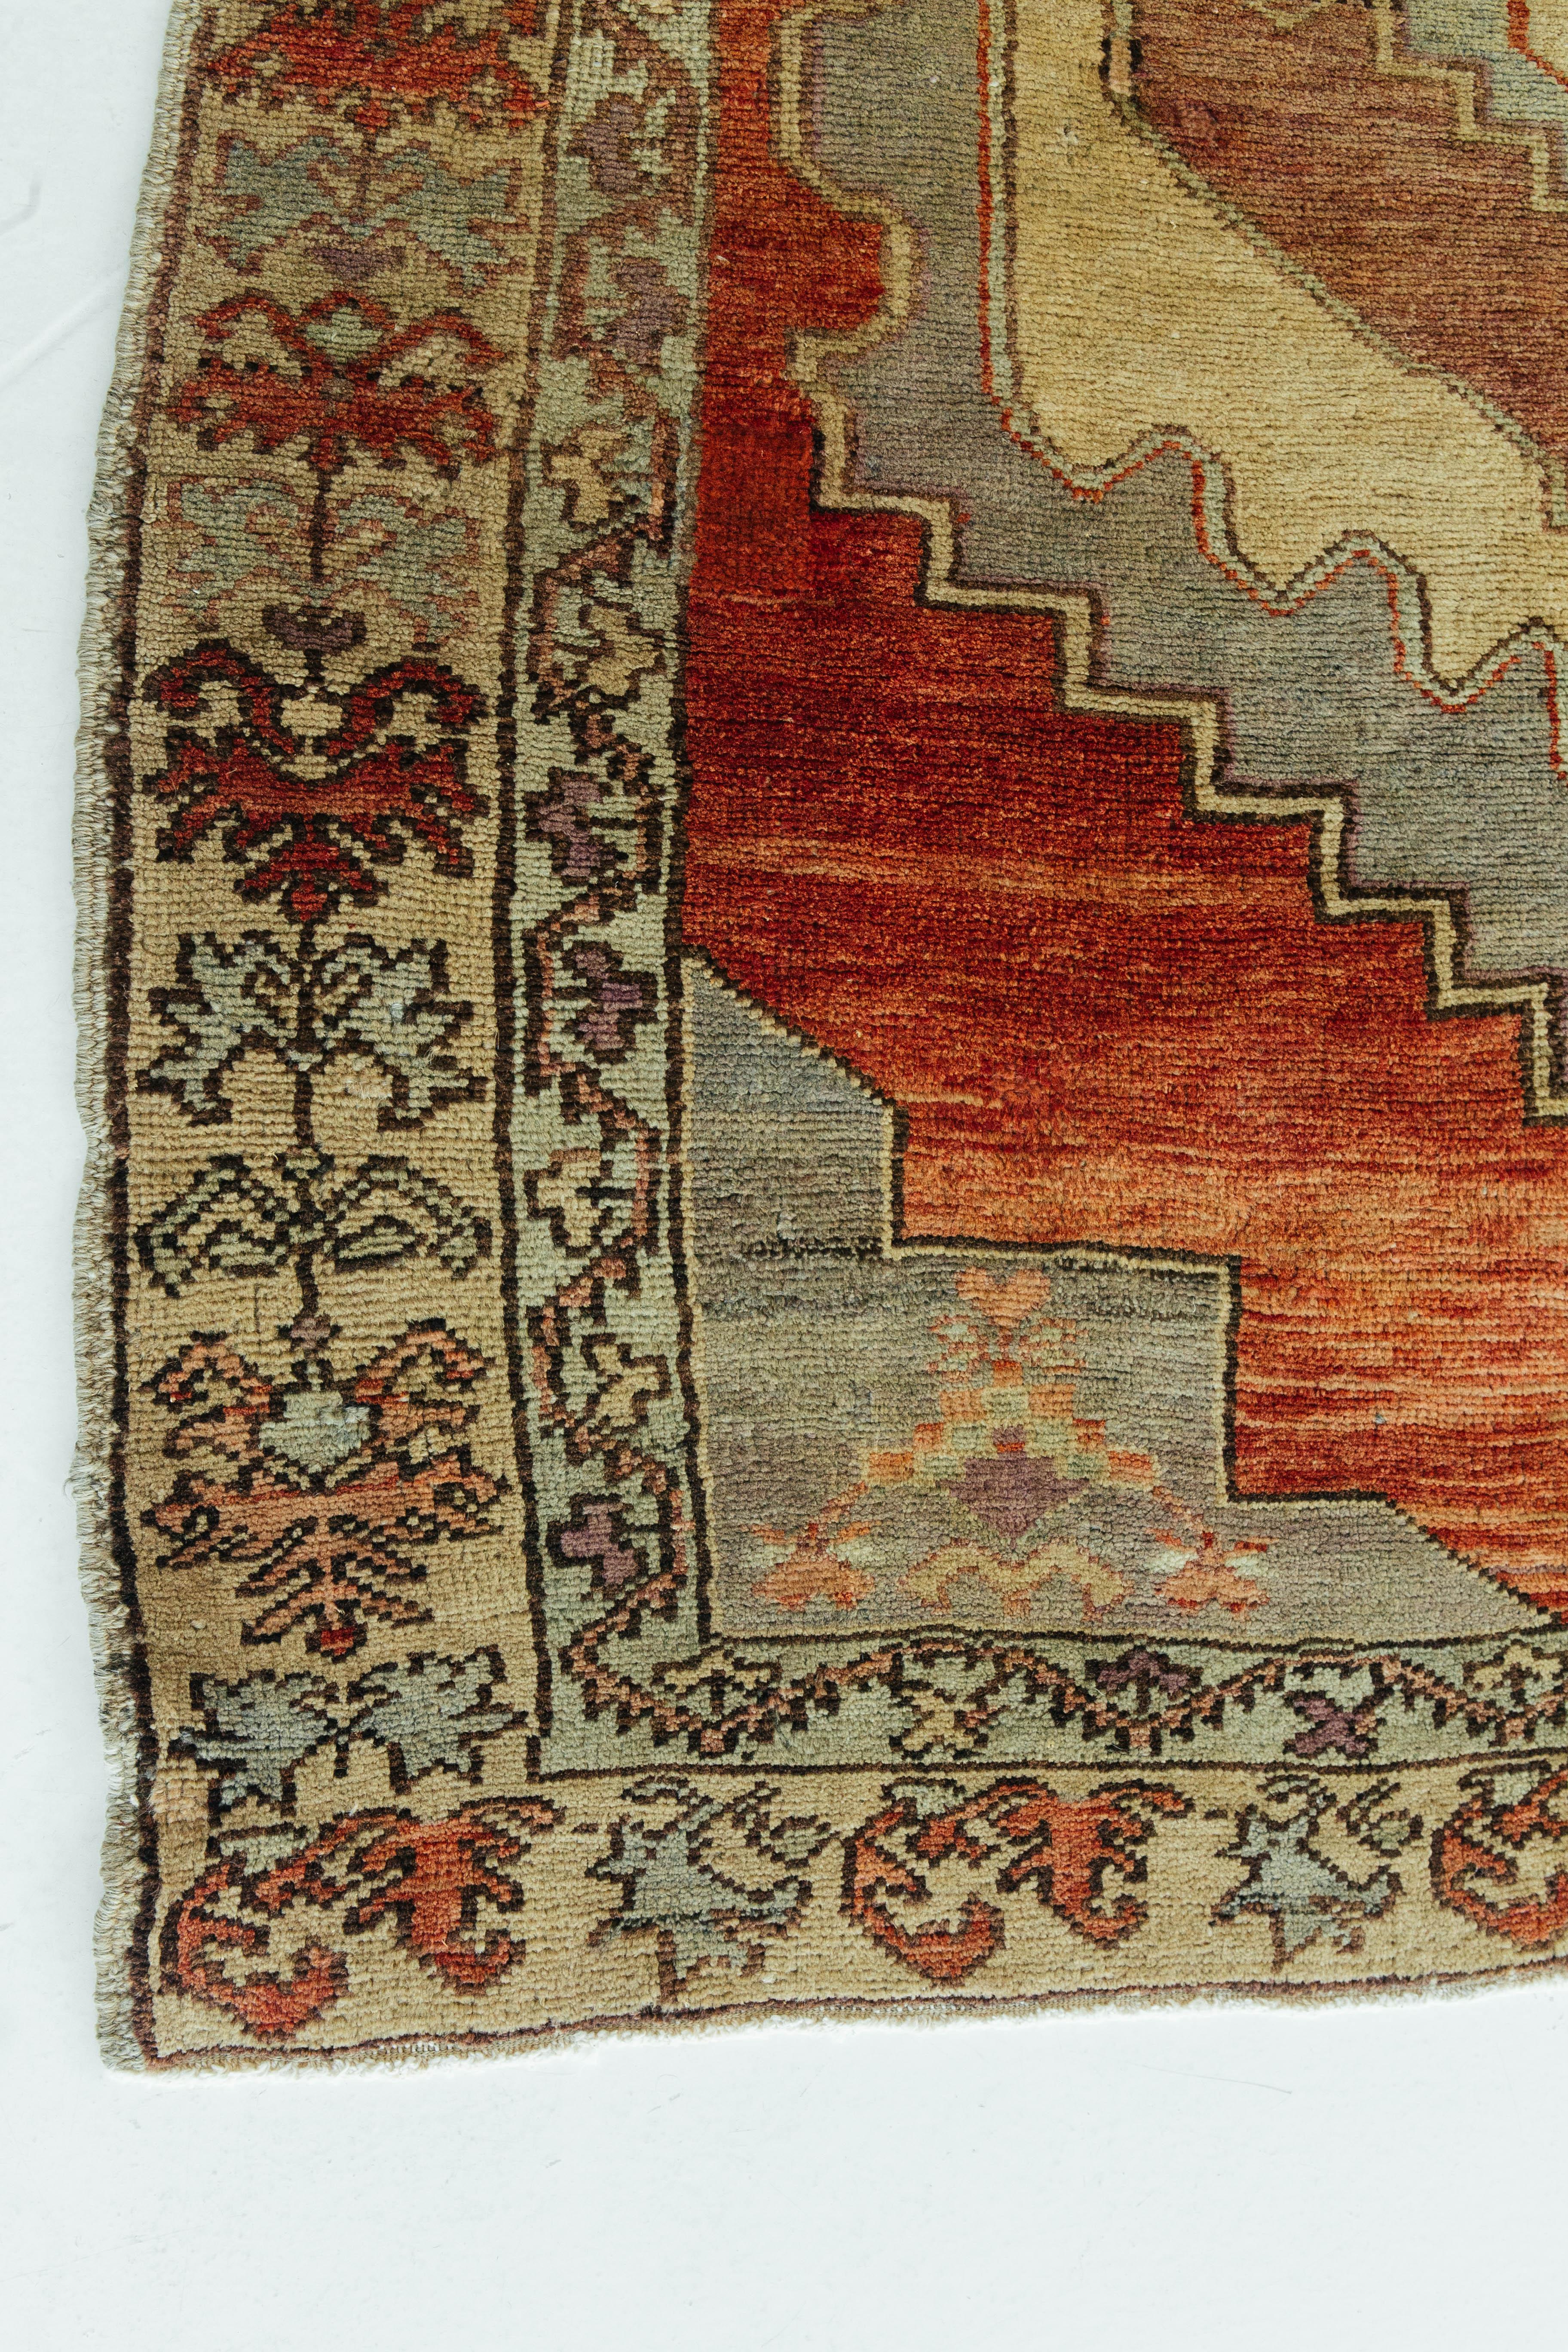 A vibrant vintage Turkish Anatolian runner that will bring personality in any space. Anatolian rugs weave together dyes and colours, motifs, textures and techniques that are popular in Anatolia or Asia Minor. Such techniques include their